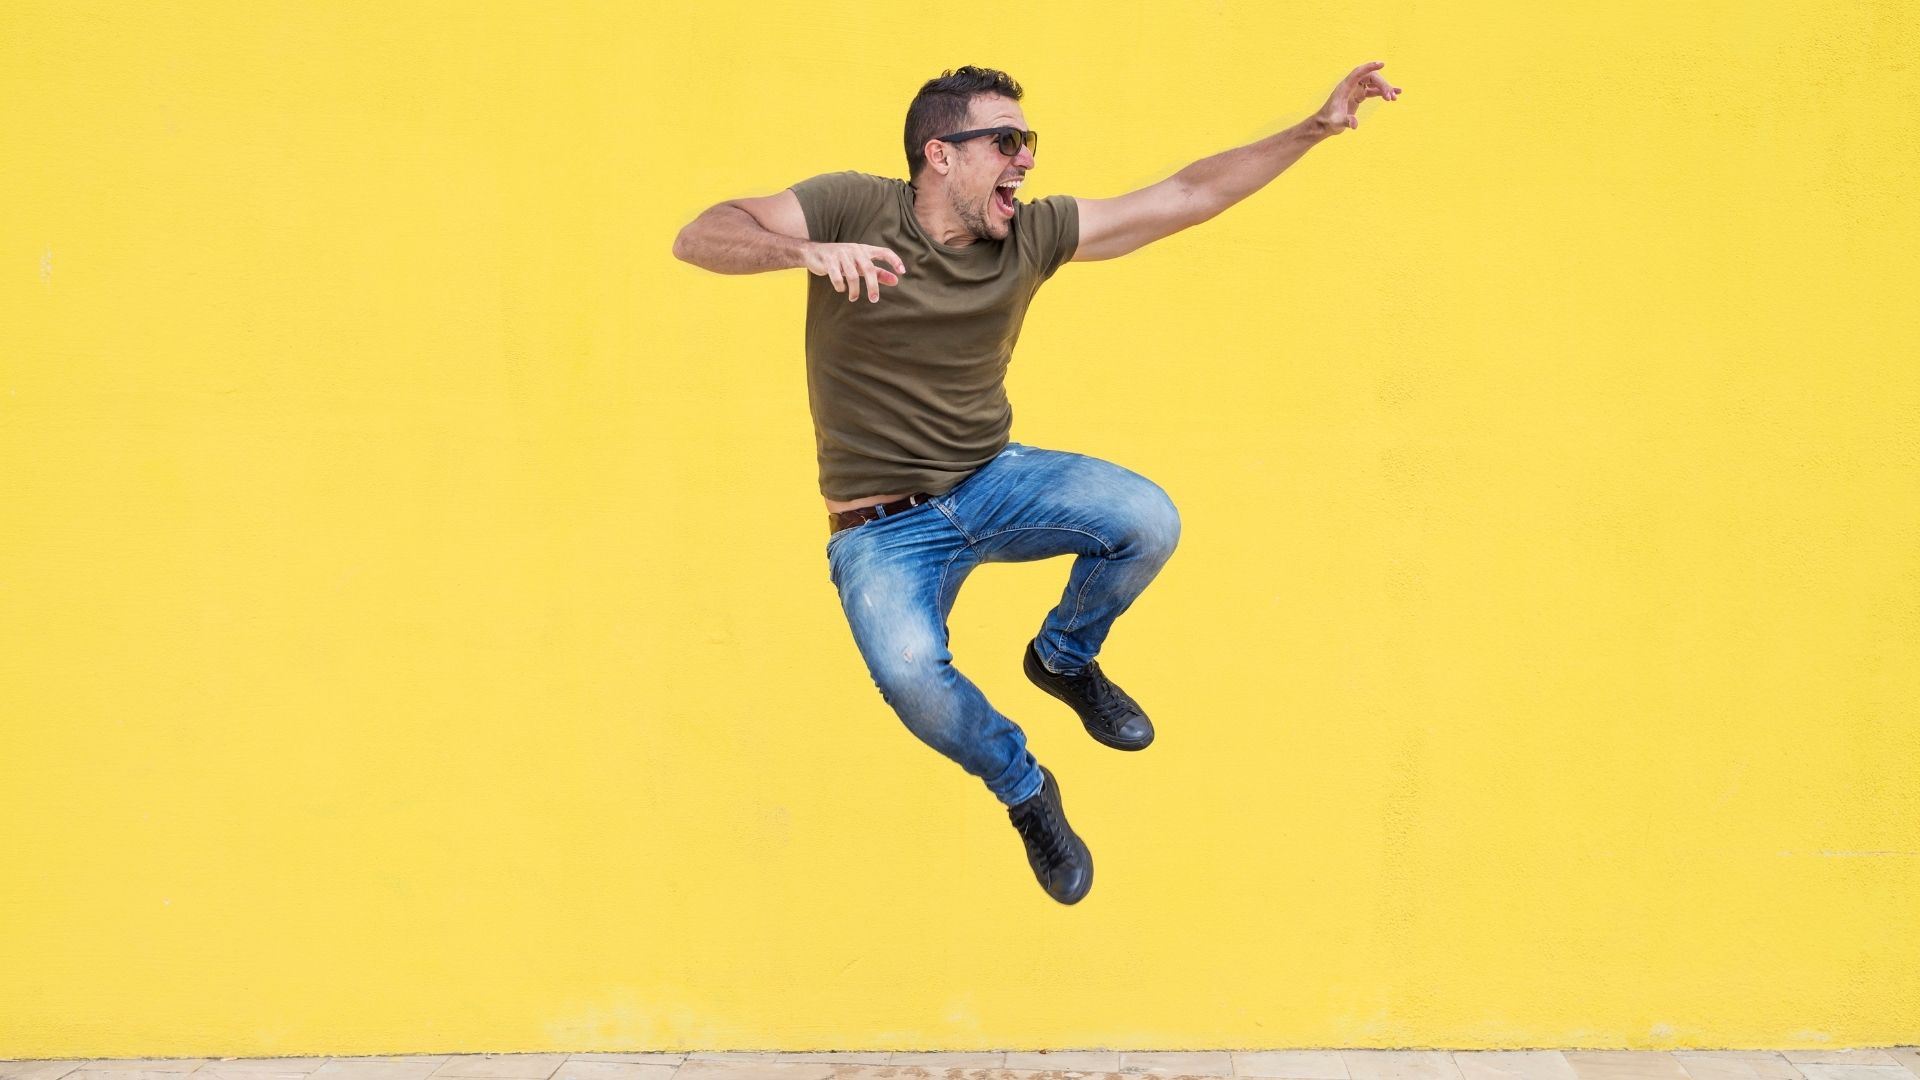 Man jumping on a yellow background